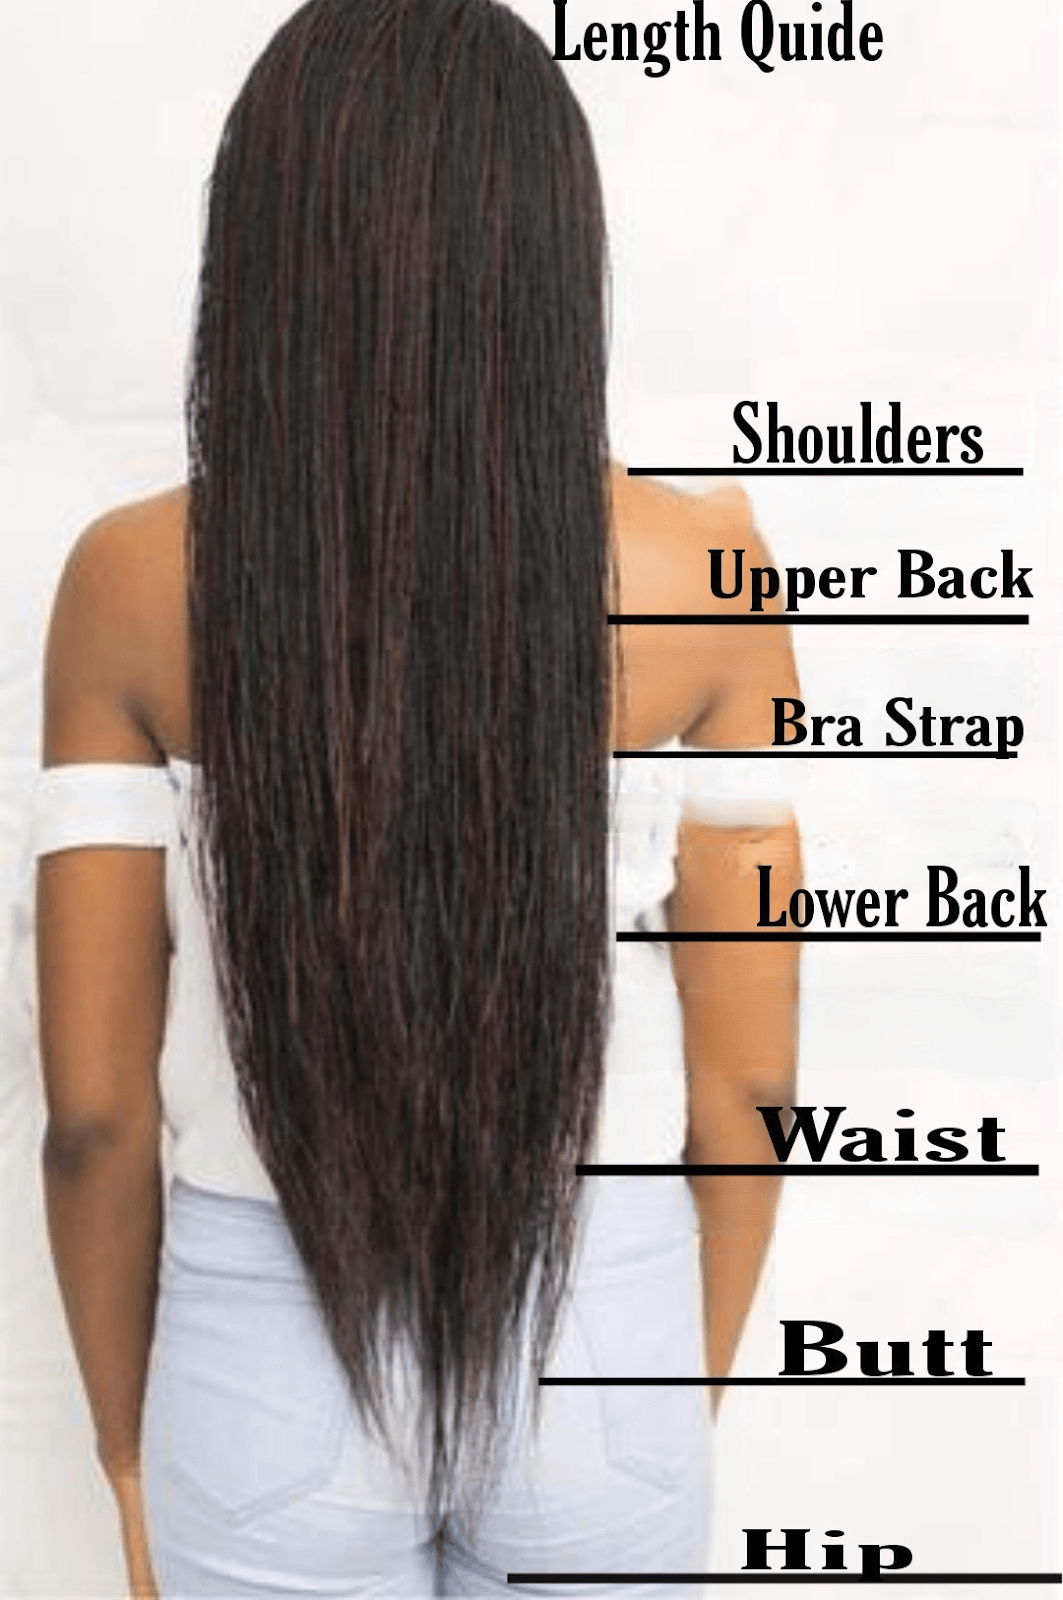 Length Guide for Chel's Hair Braiding Bowie MD